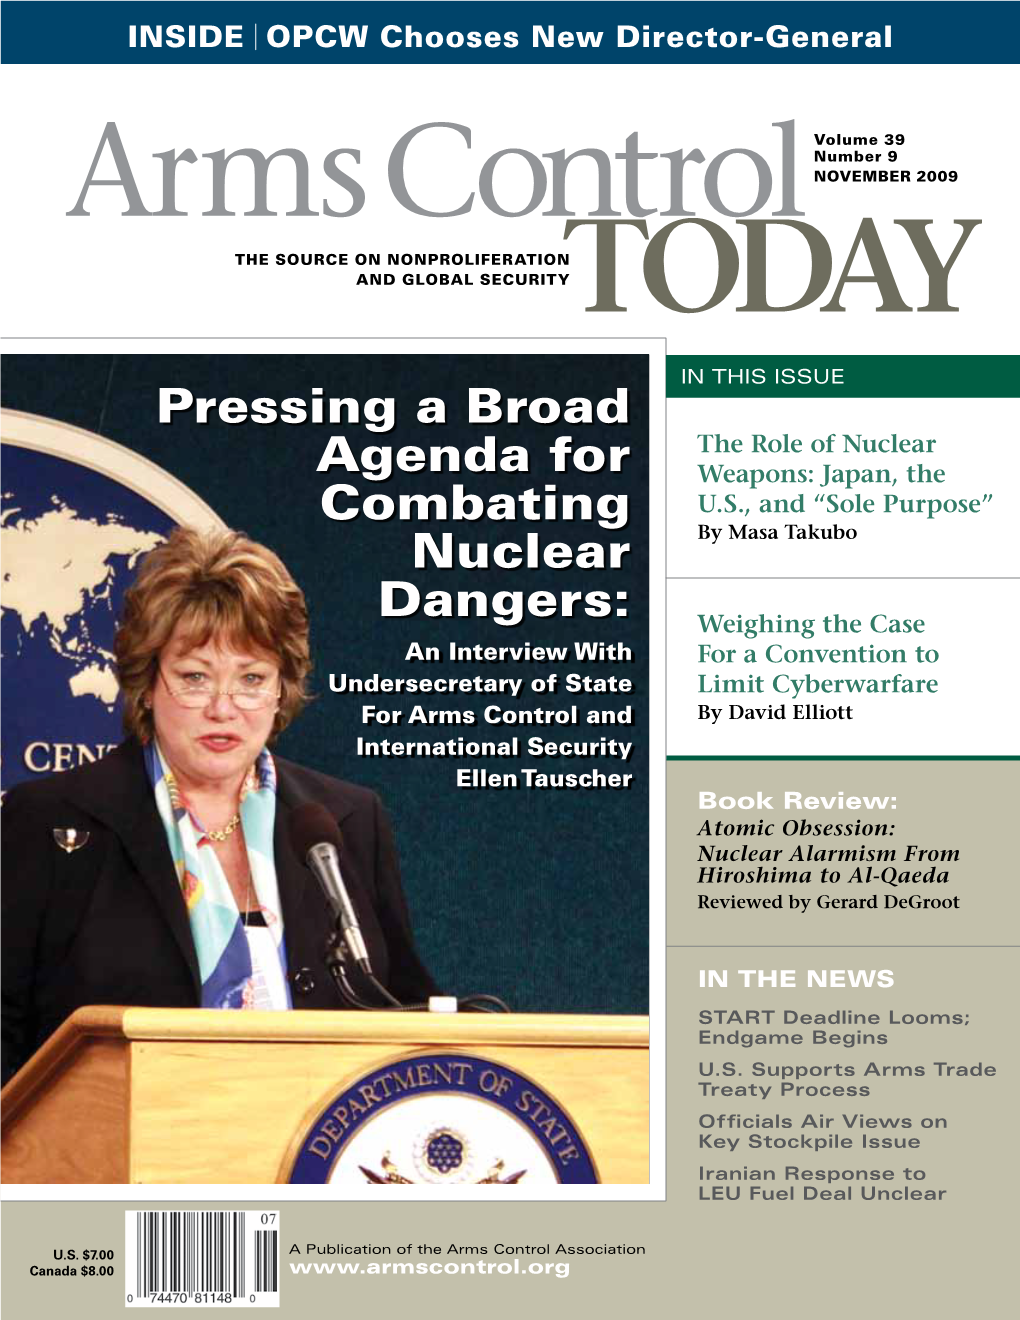 Pressing a Broad Agenda for Combating Nuclear Dangers: an Interview with Undersecretary of State for Arms Control and International Security Ellen Tauscher